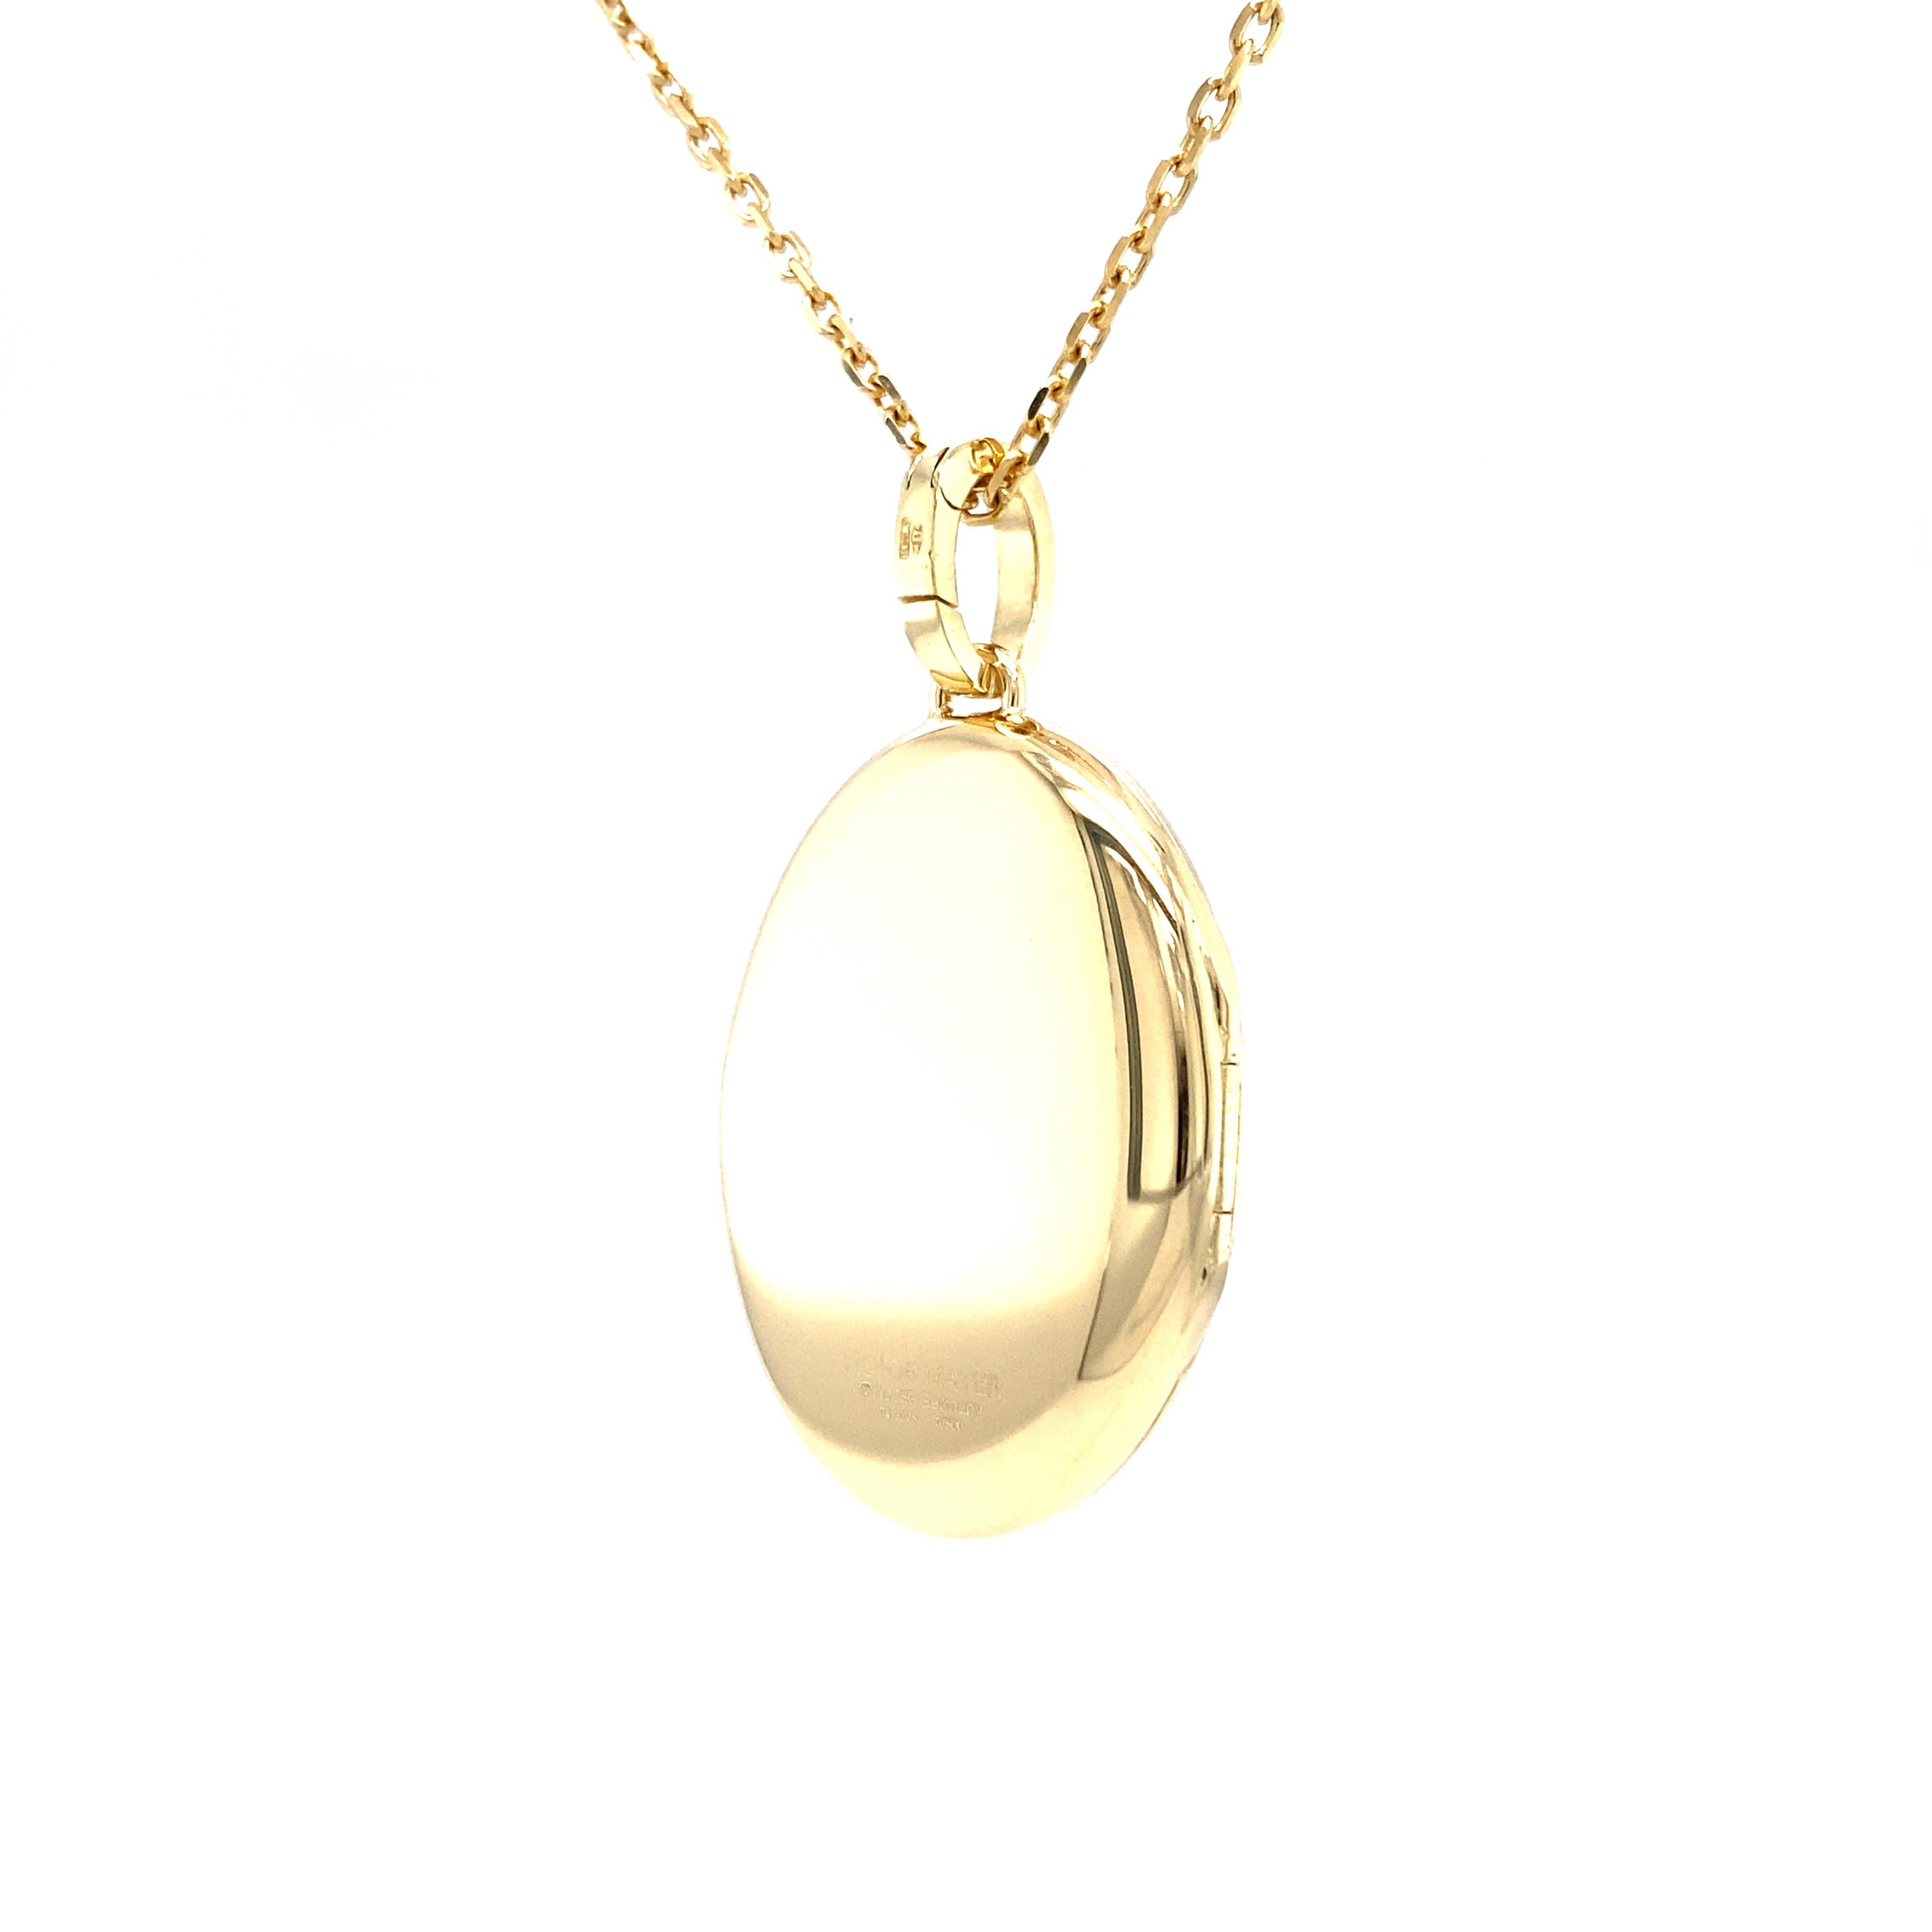 Oval Polished Locket Pendant Necklace - 18k Yellow Gold - 9 Diamonds 0.14ct G VS For Sale 6